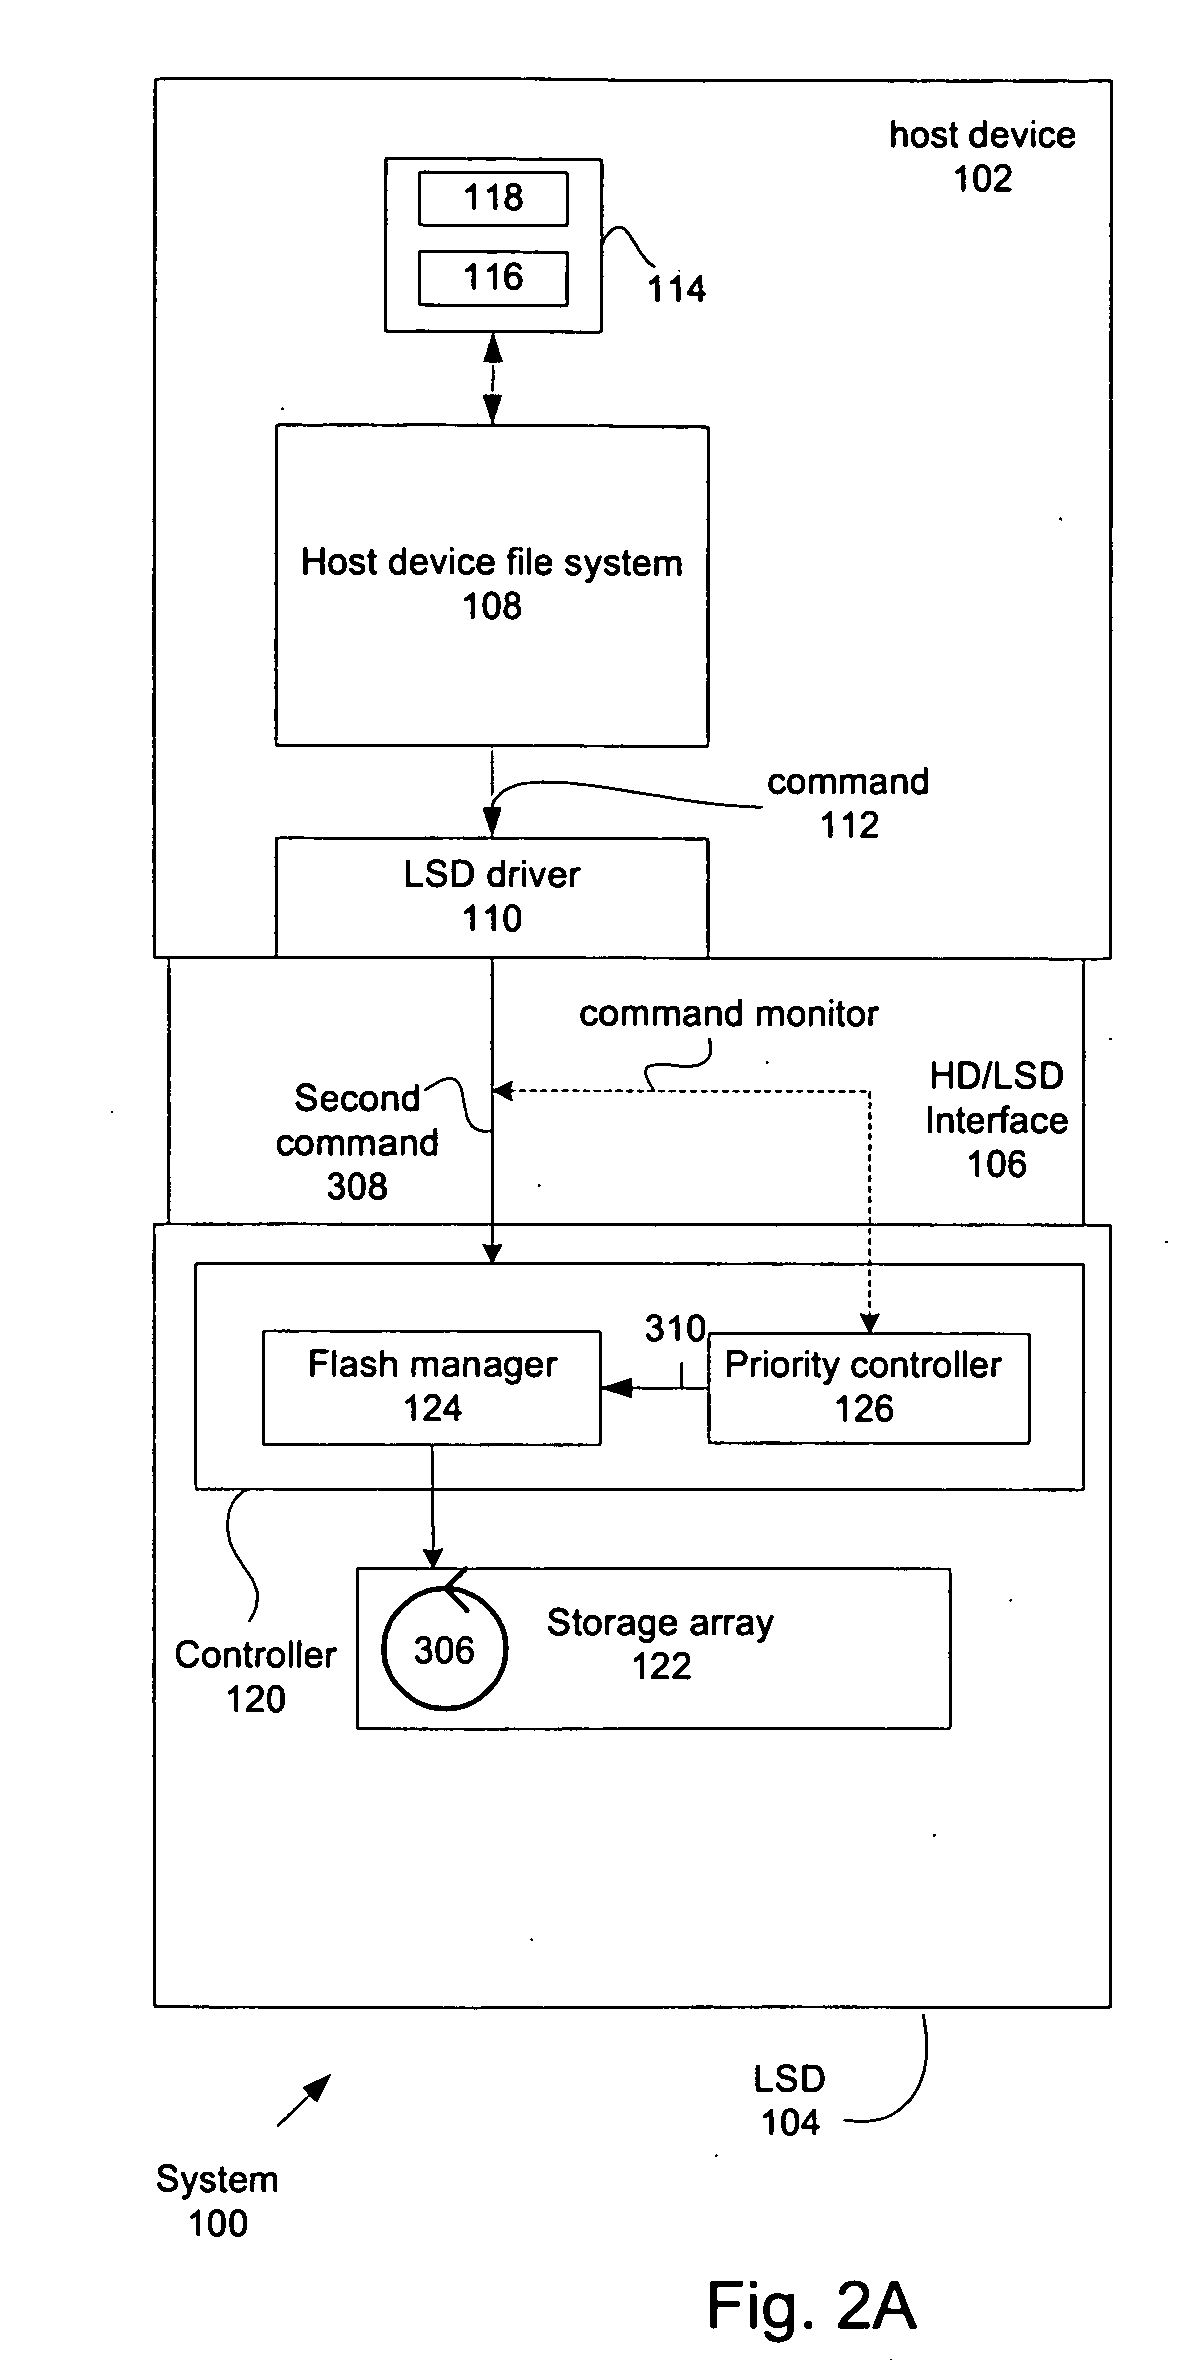 Managing multiple concurrent operations with various priority levels in a local storage device